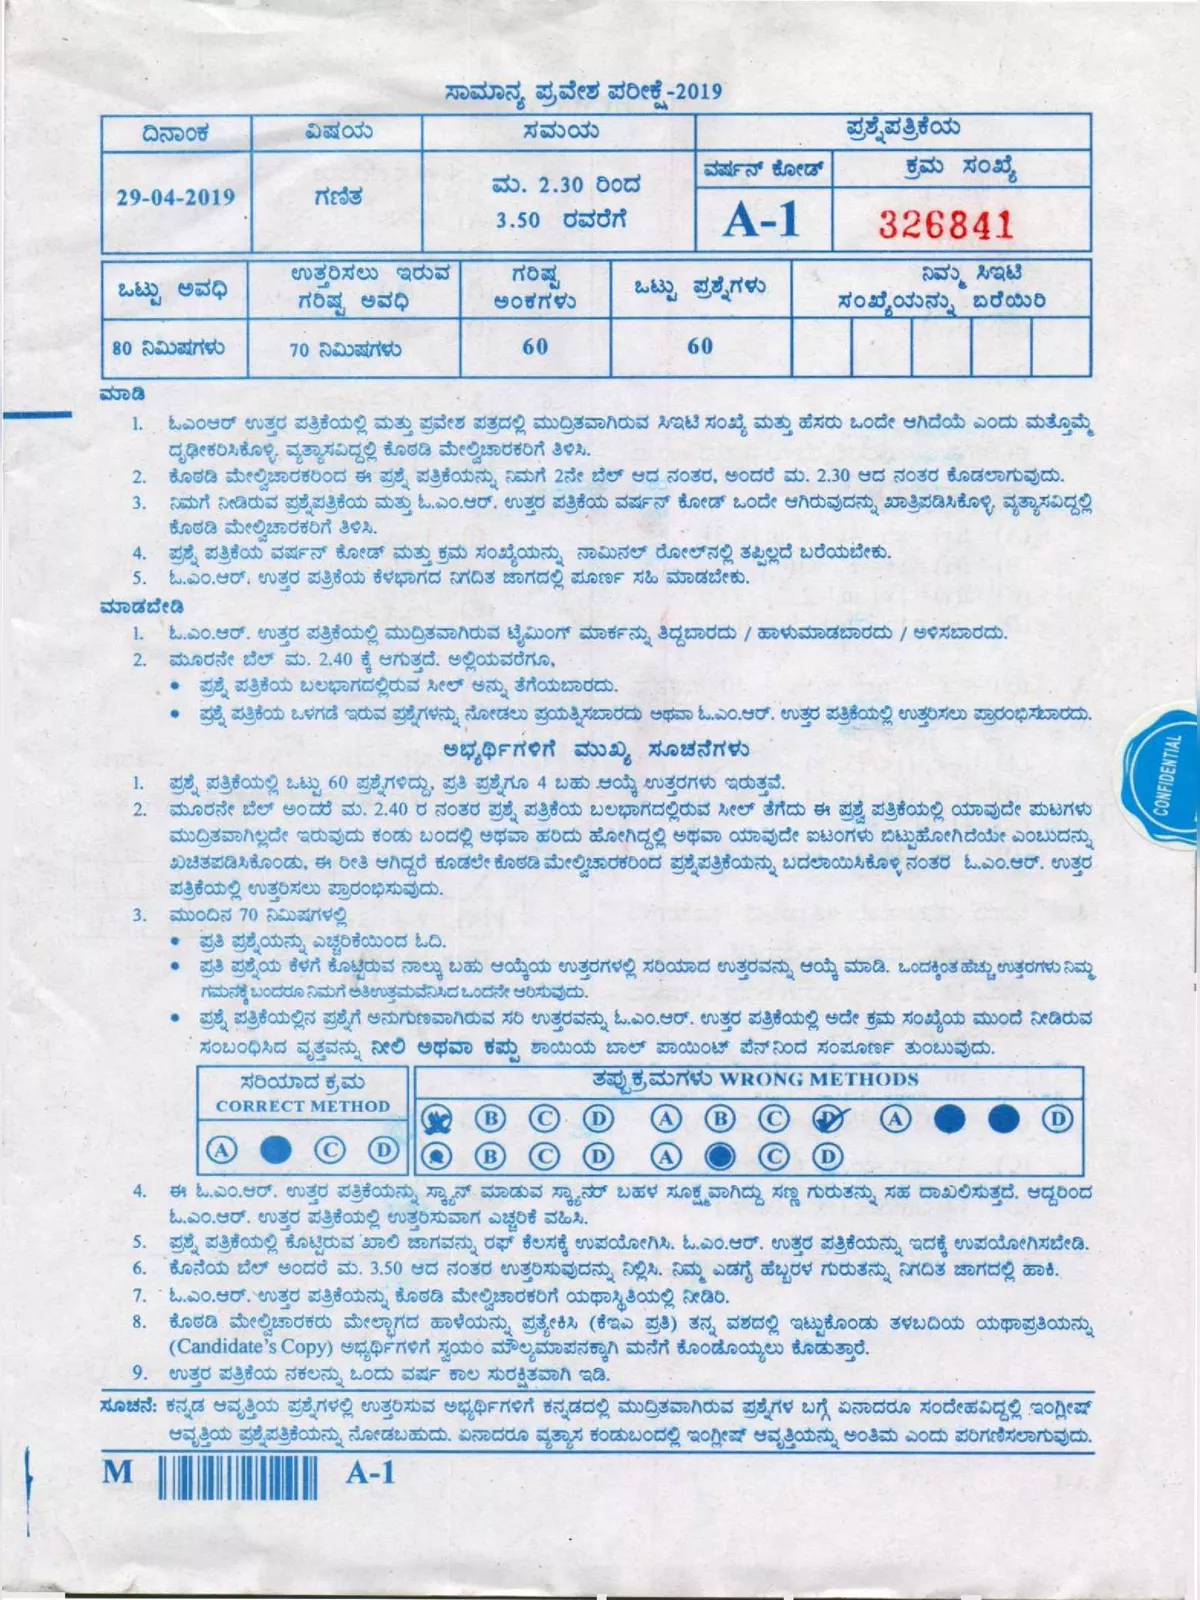 KCET PreviousYear Question Papers with Solutions